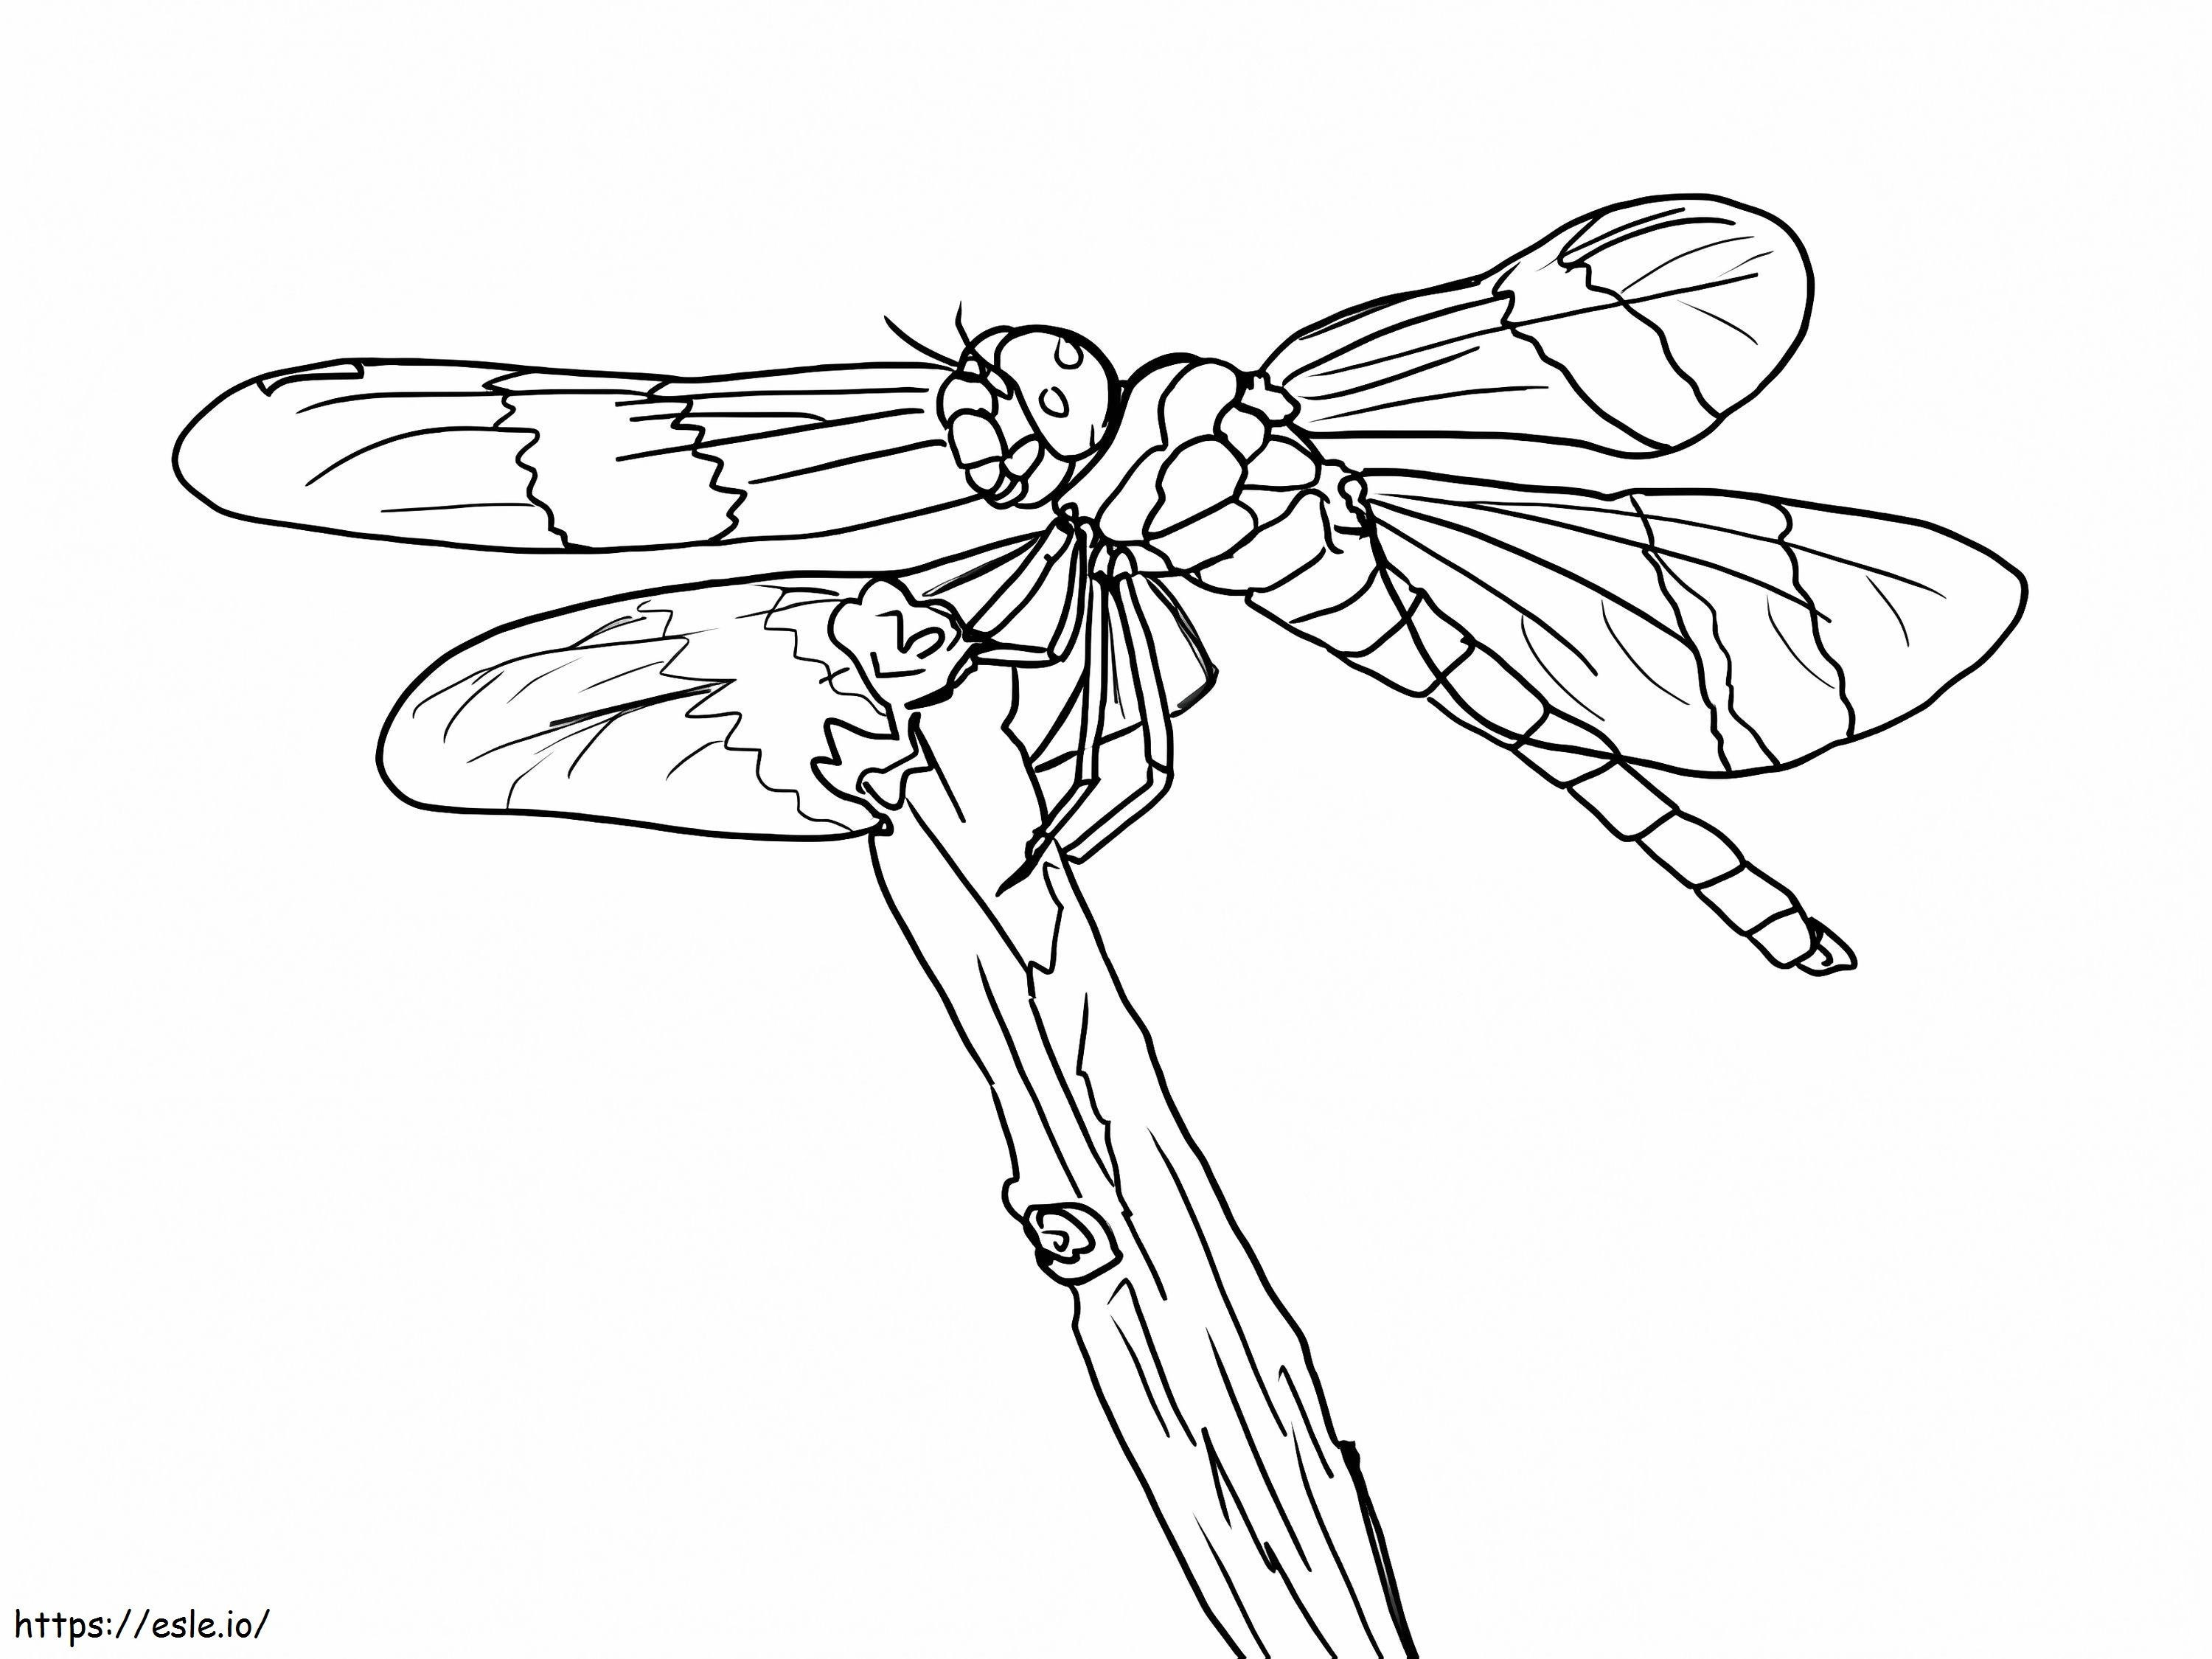 Dragonfly 1 coloring page